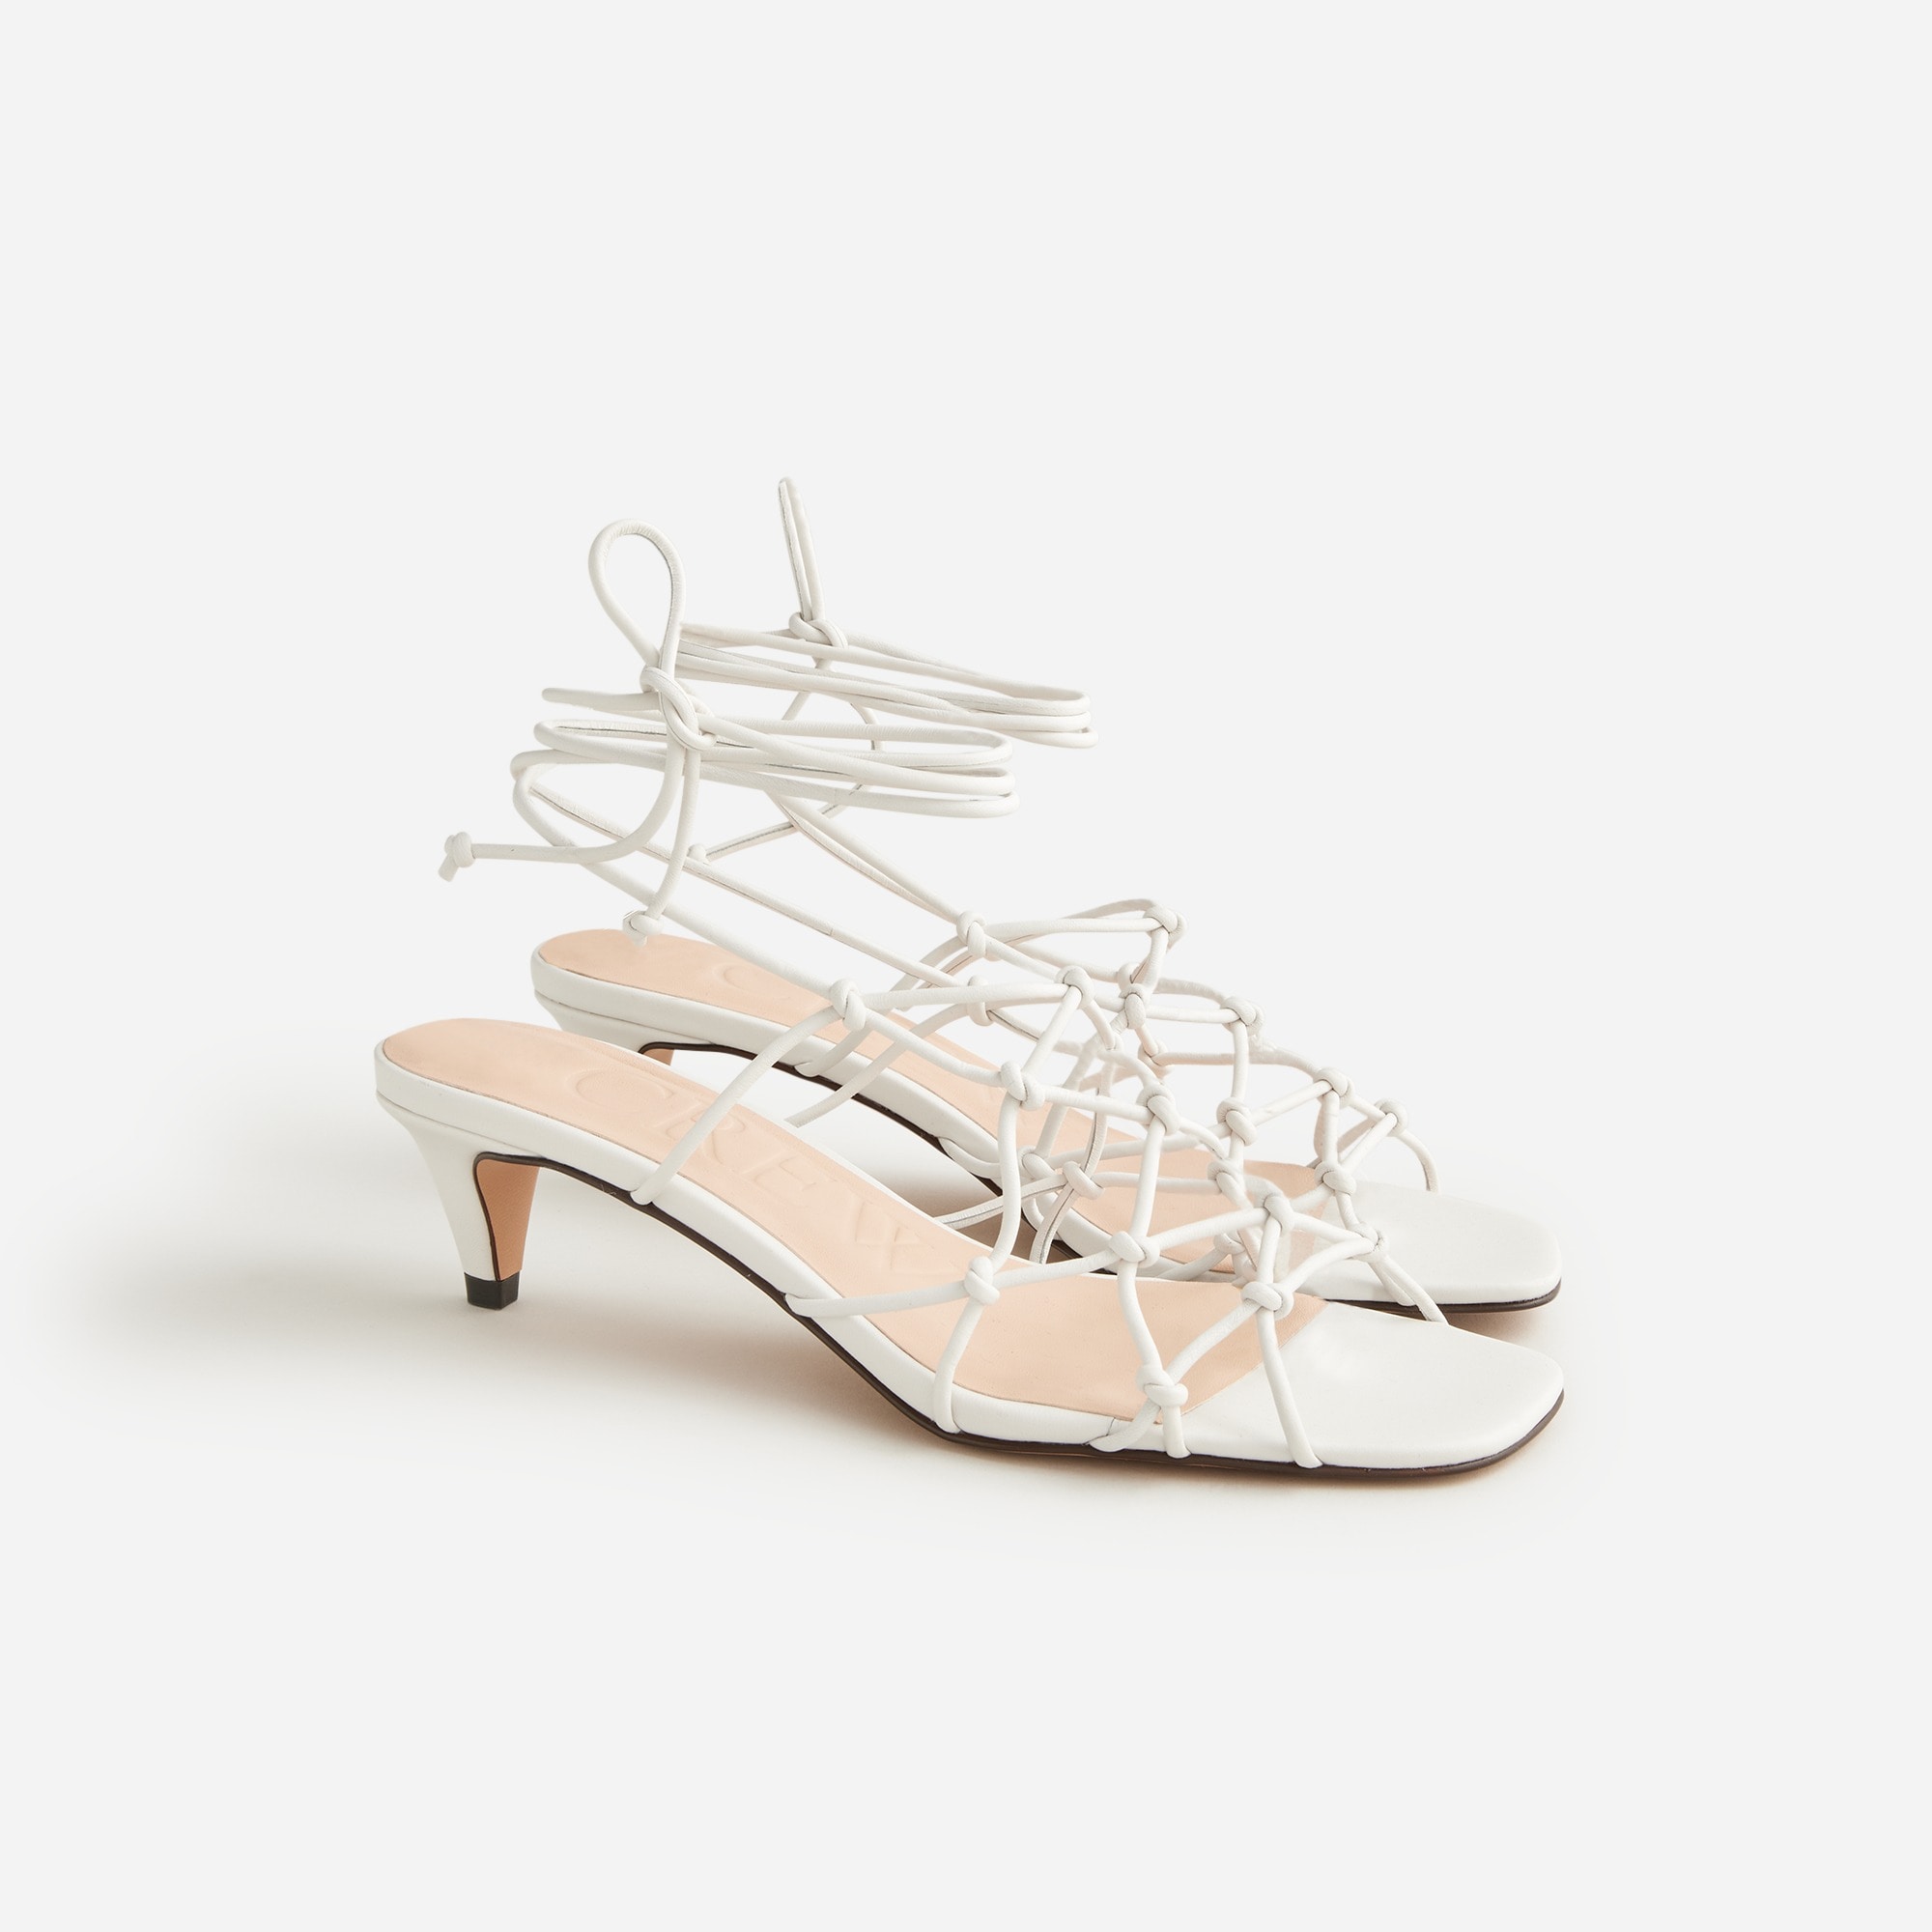  Pre-order Zadie knotted lace-up kitten heels in leather